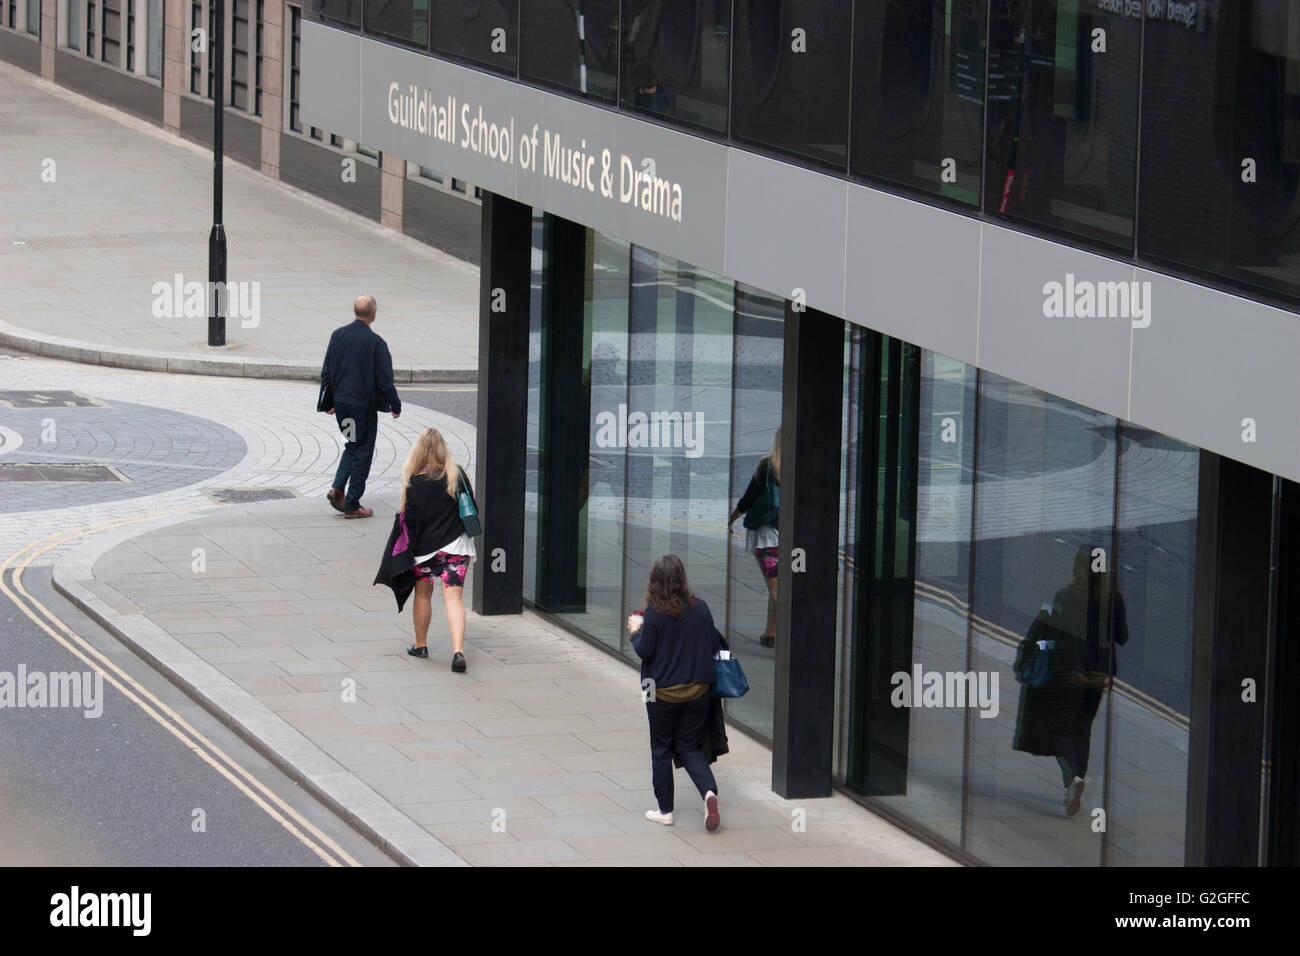 Guildhall School of Music and Drama, Moorgate, Londra Foto Stock